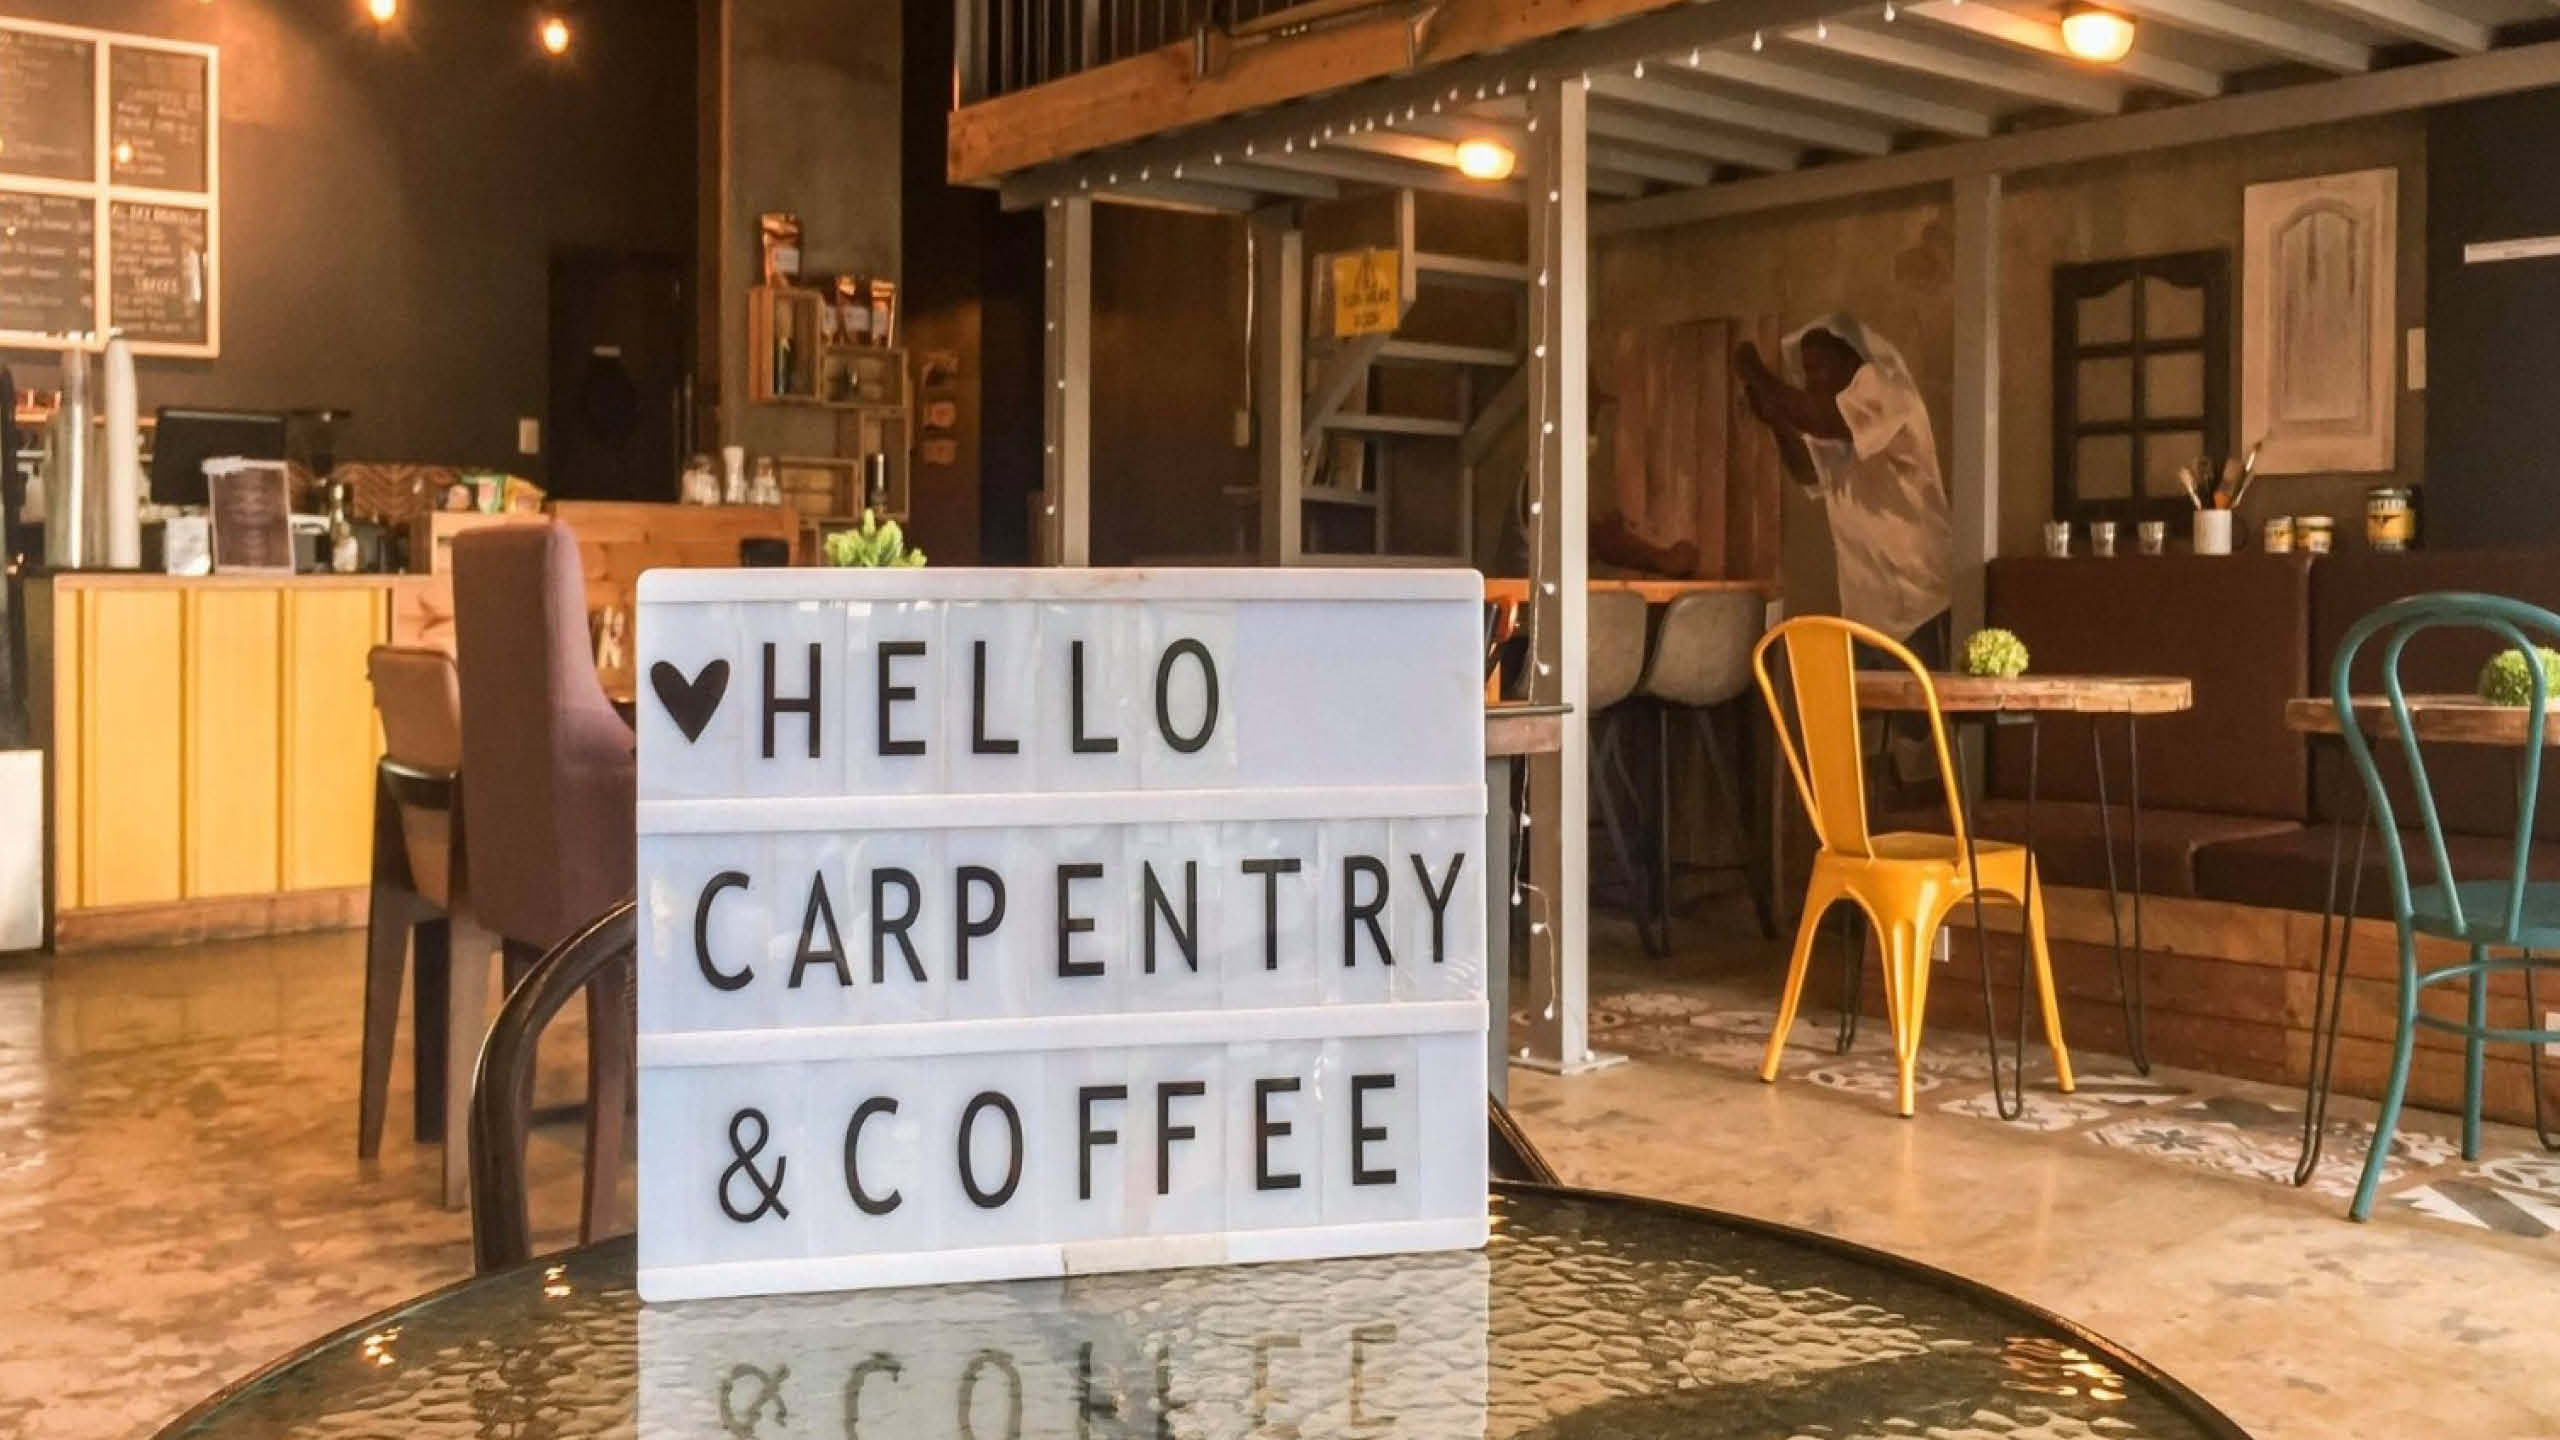 Carpentry and Coffee is a   themed cafe inspired by the owners' passions. Image from Carpentry and Coffee via Instagram